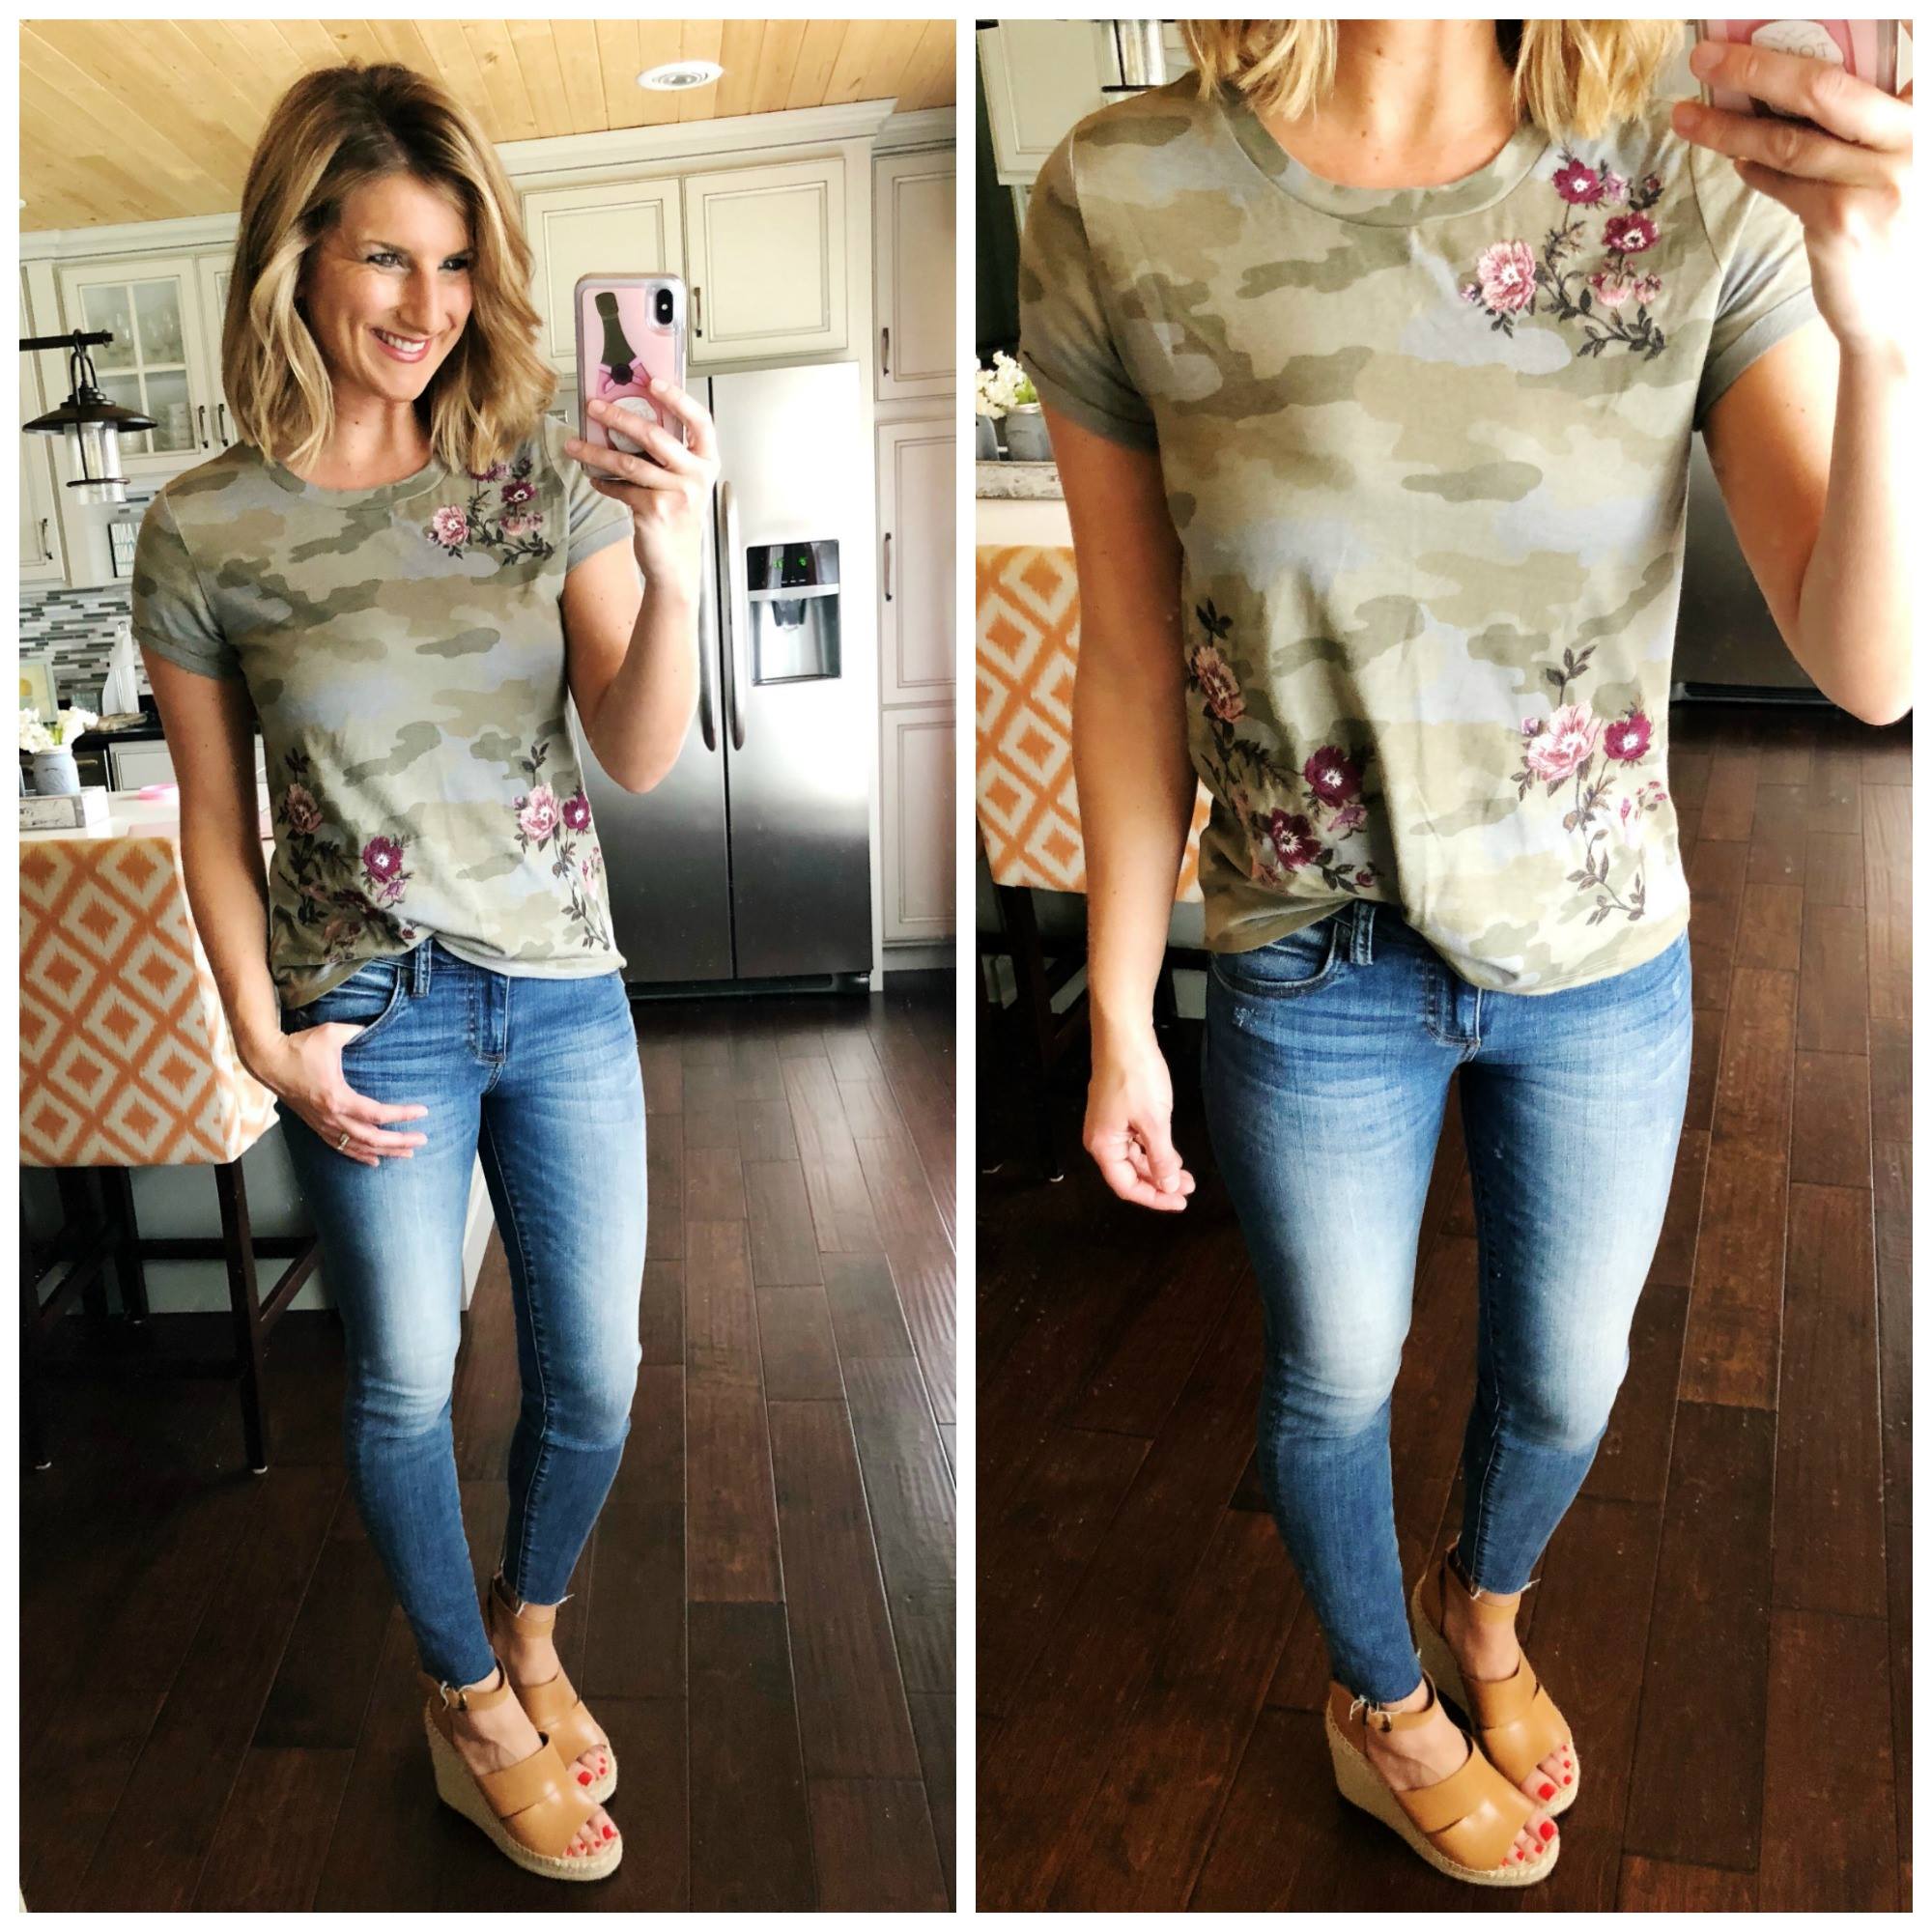 Embroidered Camo Top // Light Wash Jeggings + Wedge Sandals // Spring Fashion